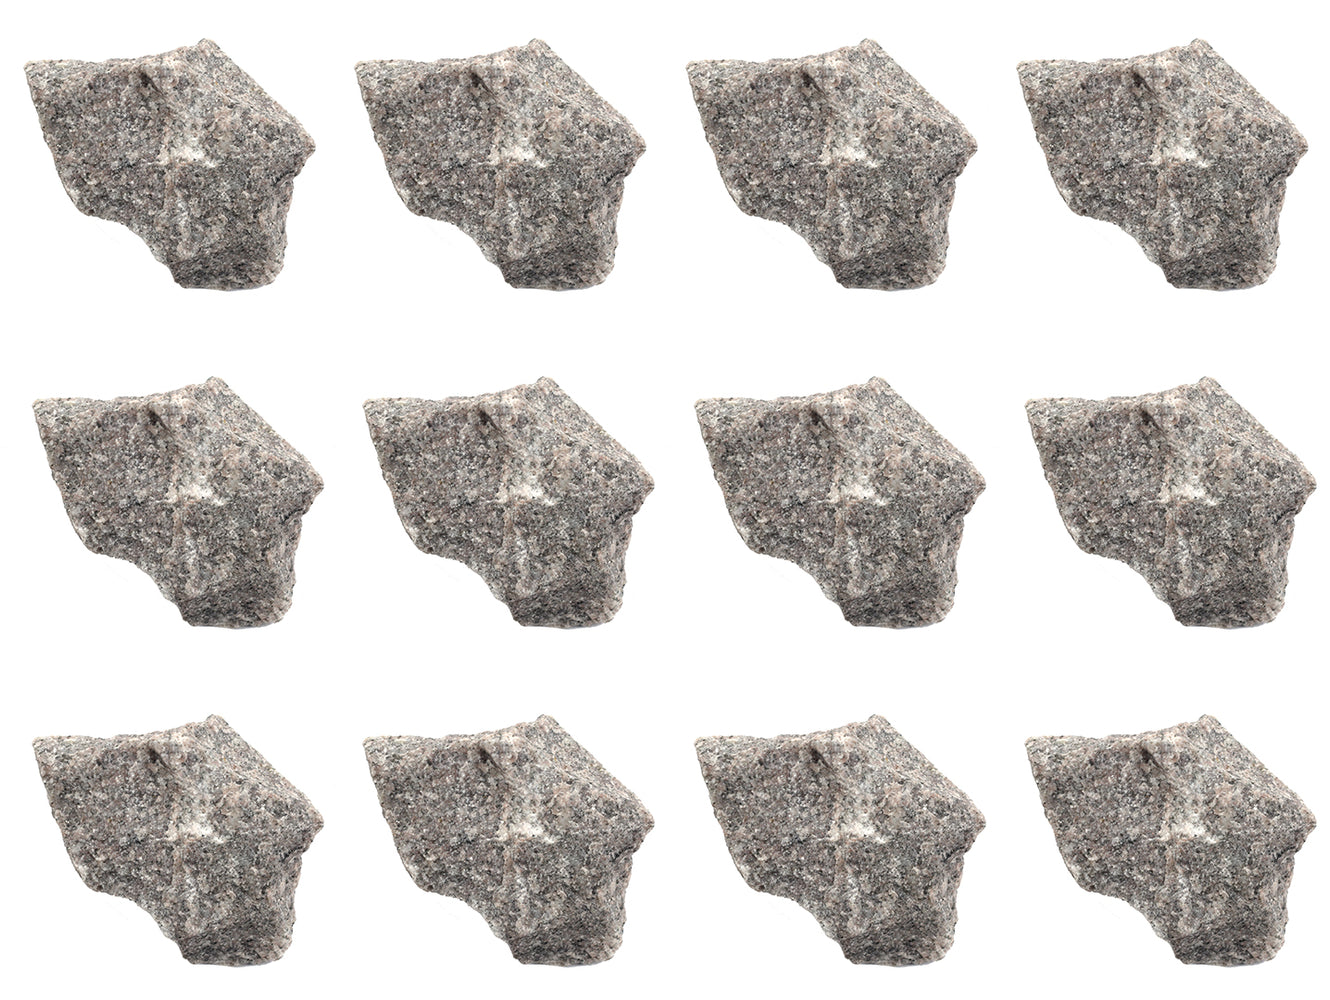 12PK Raw Pink Granite, Igneous Rock Specimens - Approx. 1" - Geologist Selected & Hand Processed - Great for Science Classrooms - Class Pack - Eisco Labs